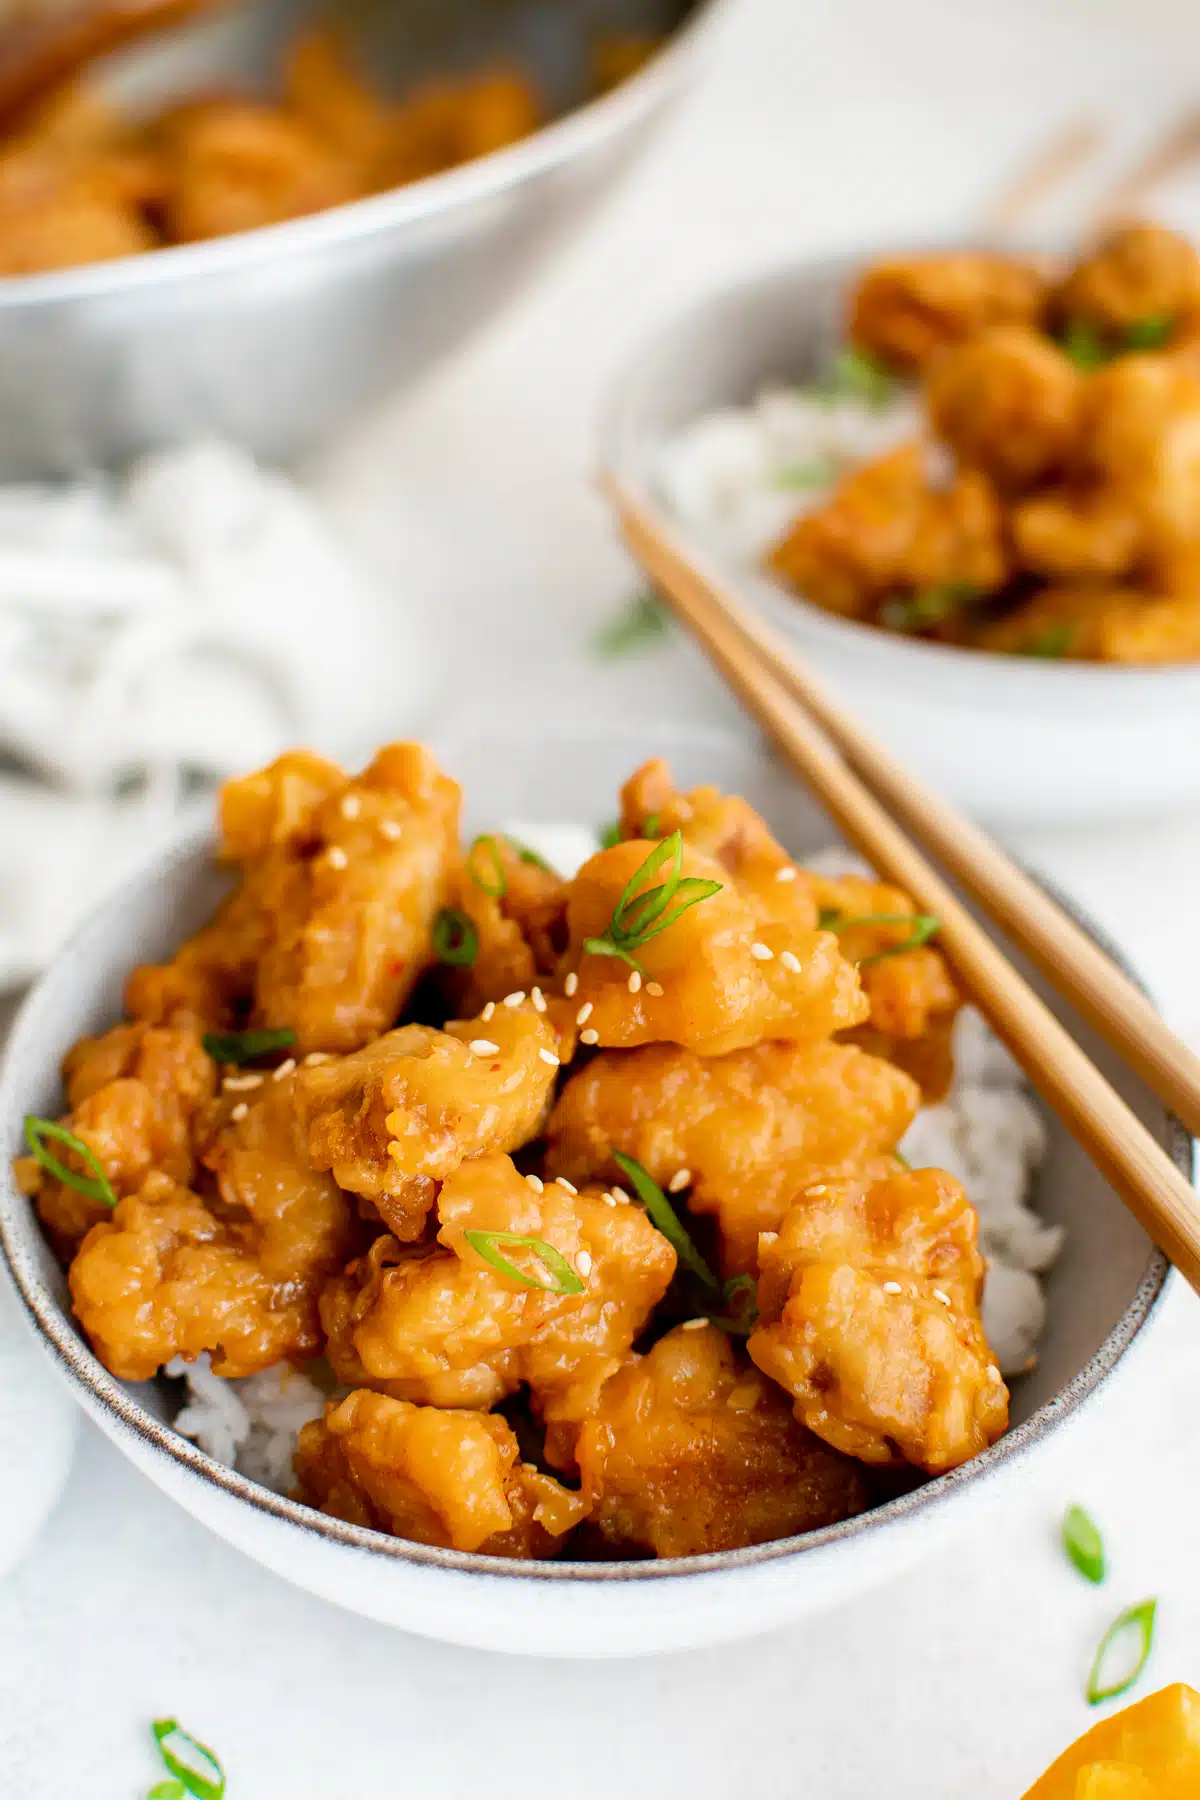 White bowl filled with white rice and topped with orange chicken pieces garnished with sliced green onions.